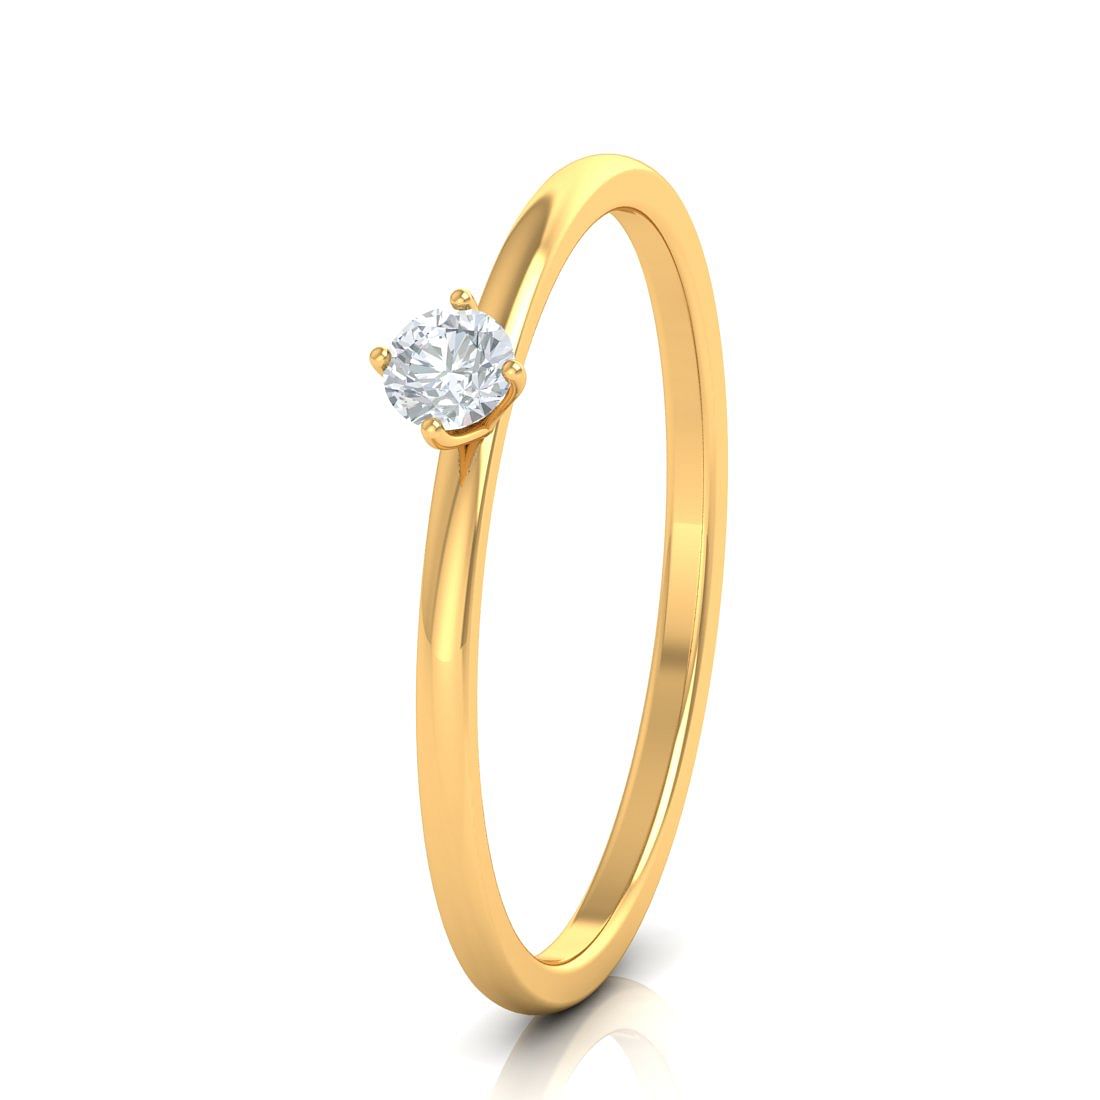 Adorable Antique Diamond Engagement Ring – Fetheray